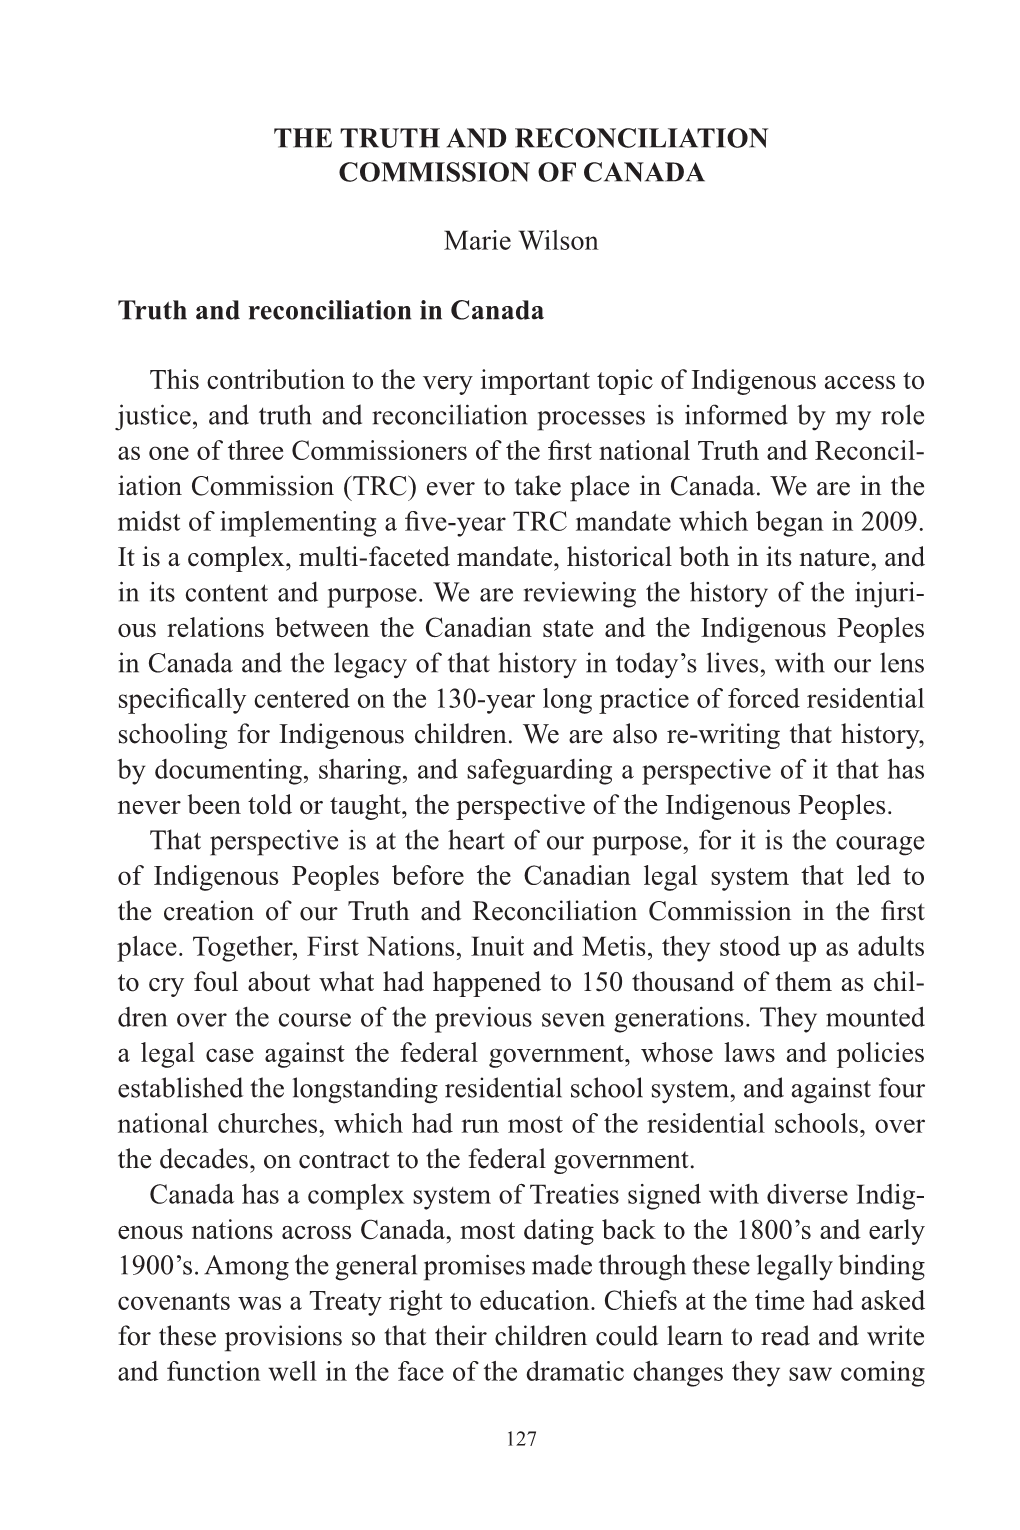 THE TRUTH and RECONCILIATION COMMISSION of CANADA Marie Wilson Truth and Reconciliation in Canada This Contribution to the Very